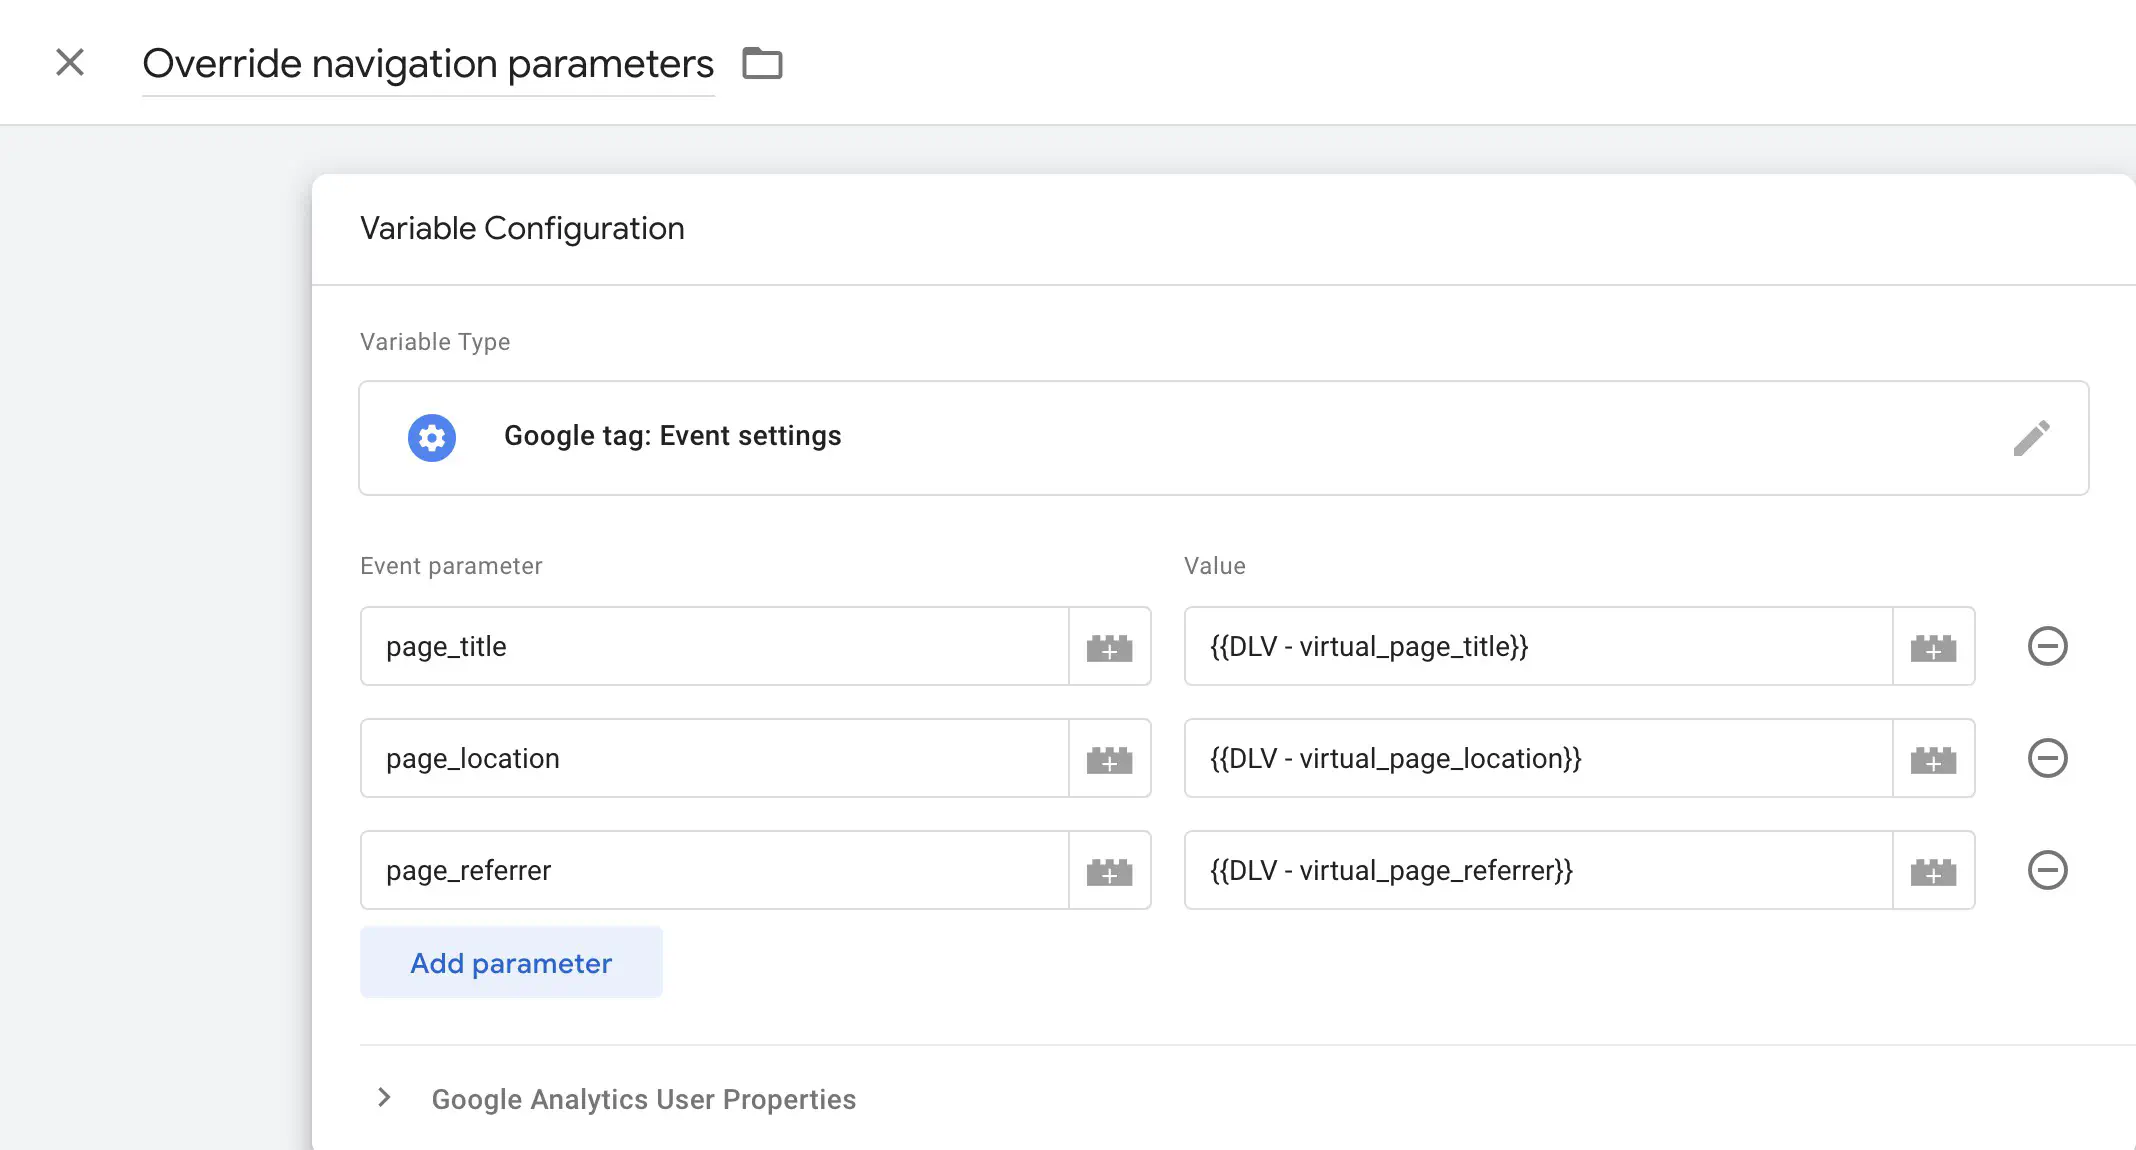 Use the Google tag: Event settings variable to fill in the page_title, page_location and page_referrer parameters.